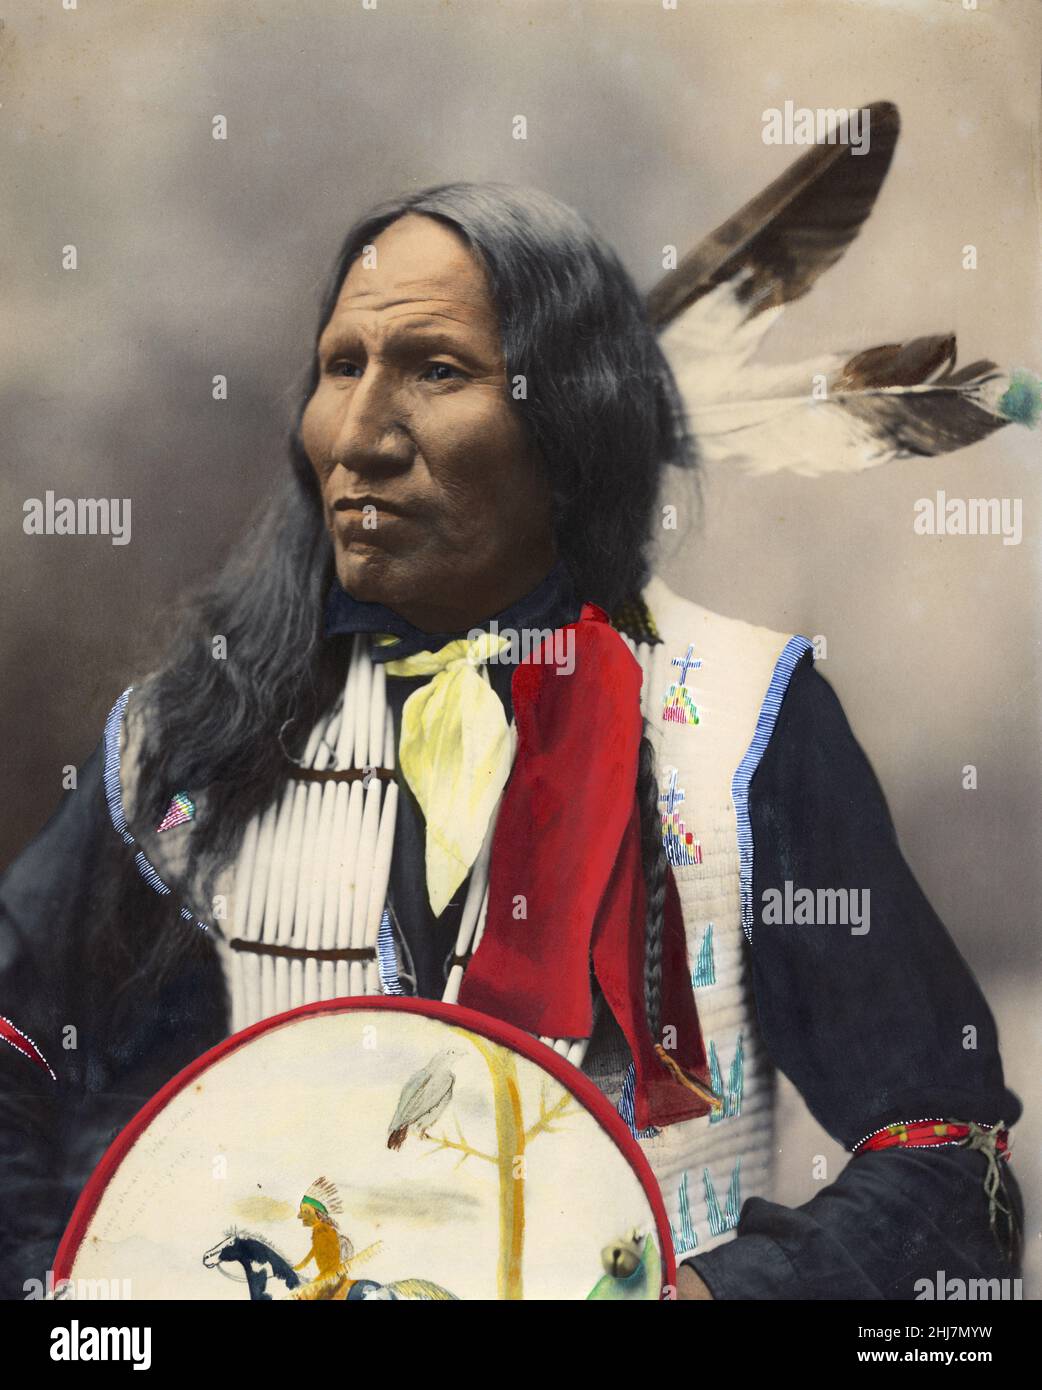 Strikes With Nose, Indian Chief - Antique and vintage photo - Native american / Indian / American Indian, Heyn Photo, photographer, 1899. Stock Photo